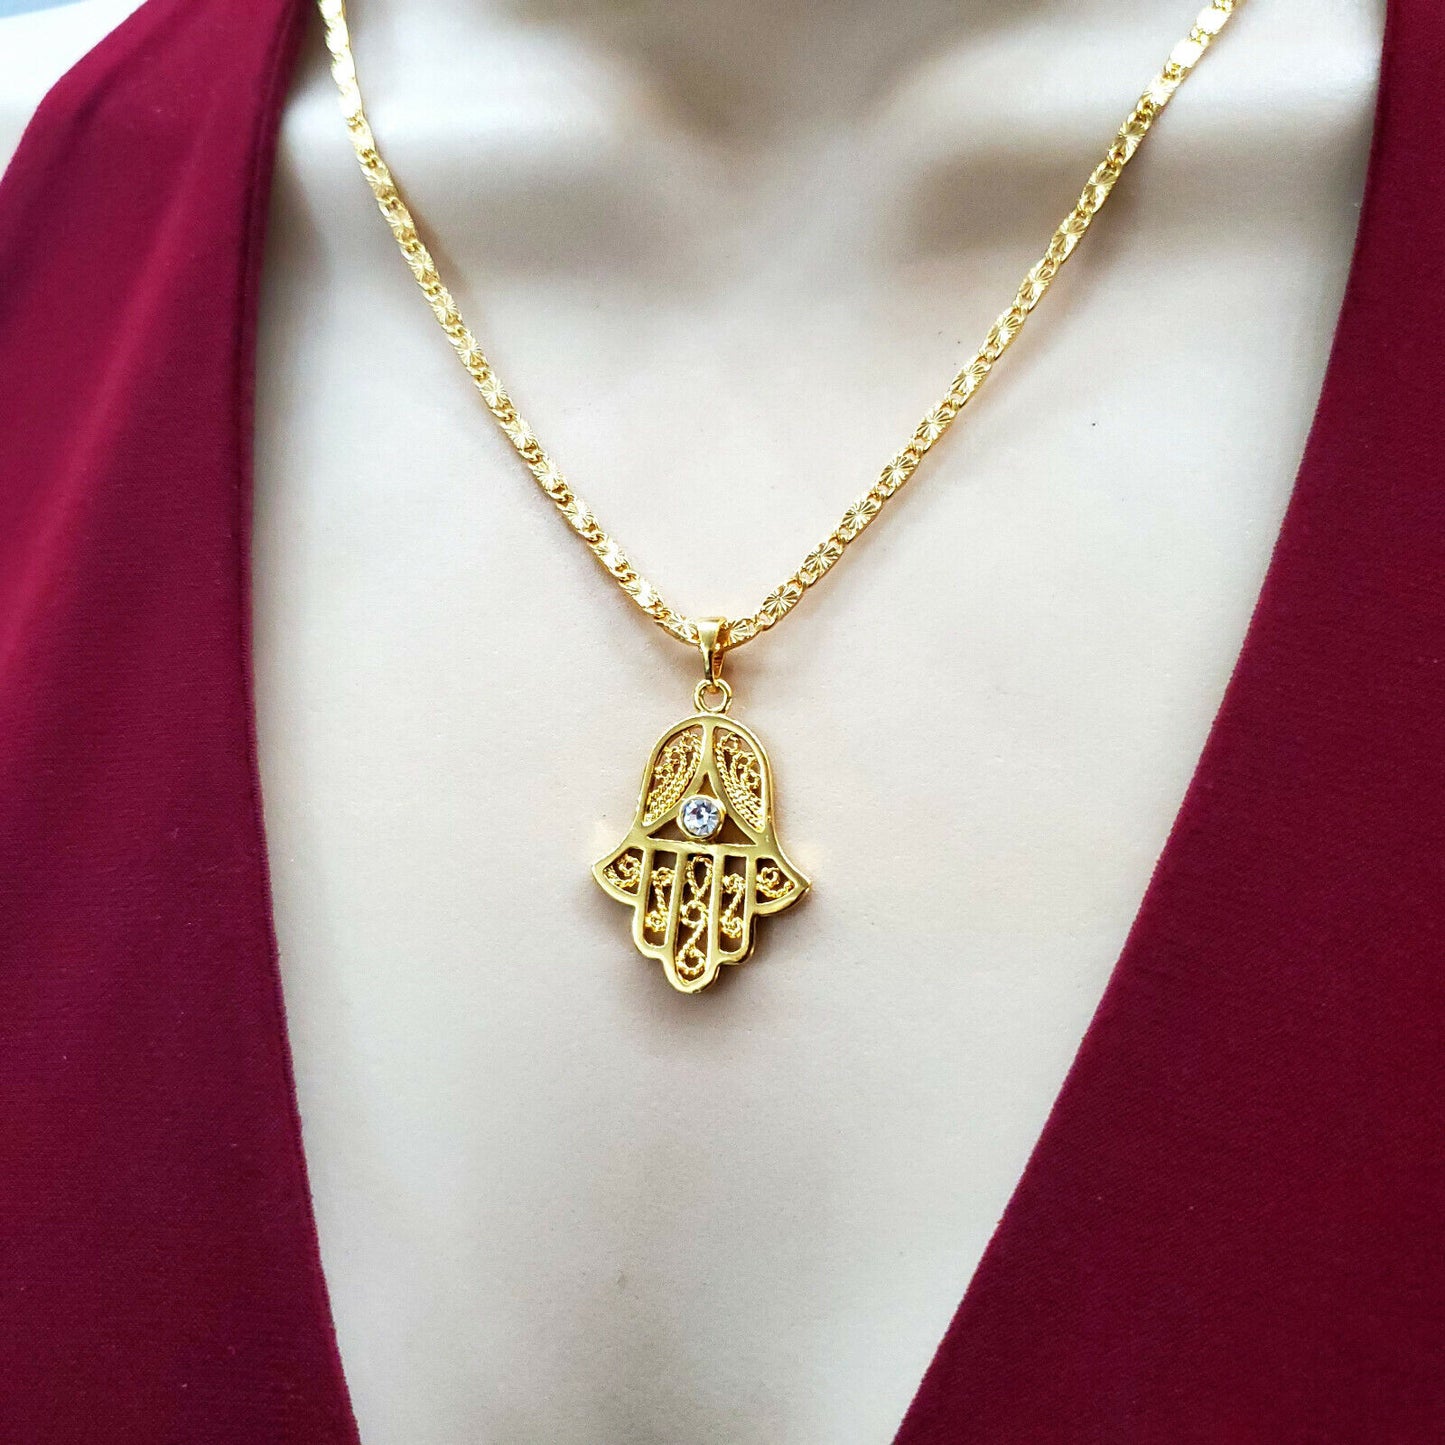 Necklaces - 24K Gold Plated. Fashion Hamsa Hand withEye Pendant & Chain.